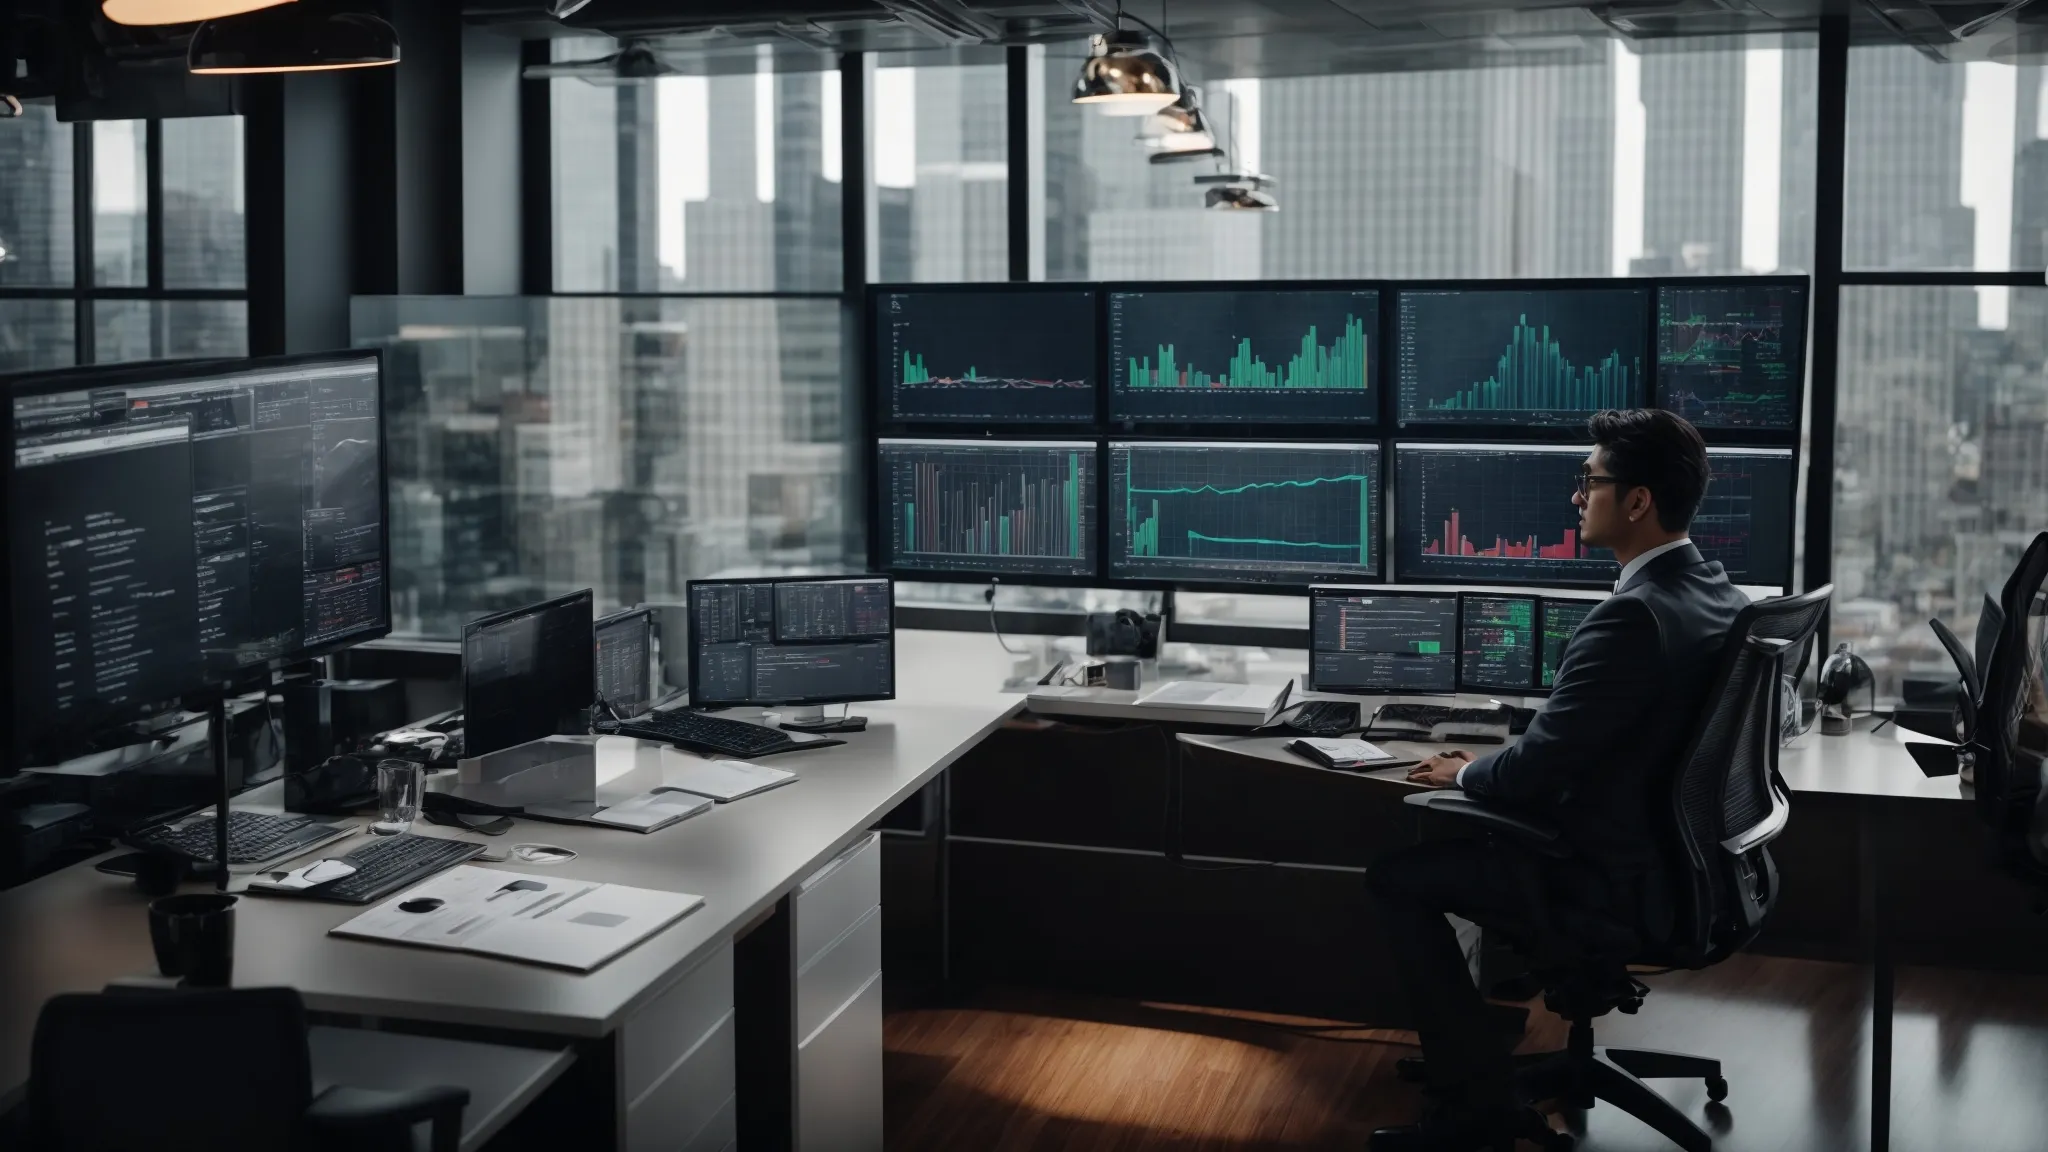 a sleek office with multiple monitors displaying graphs and charts, where professionals in business attire are focused on their tasks while interacting with advanced management software interfaces.